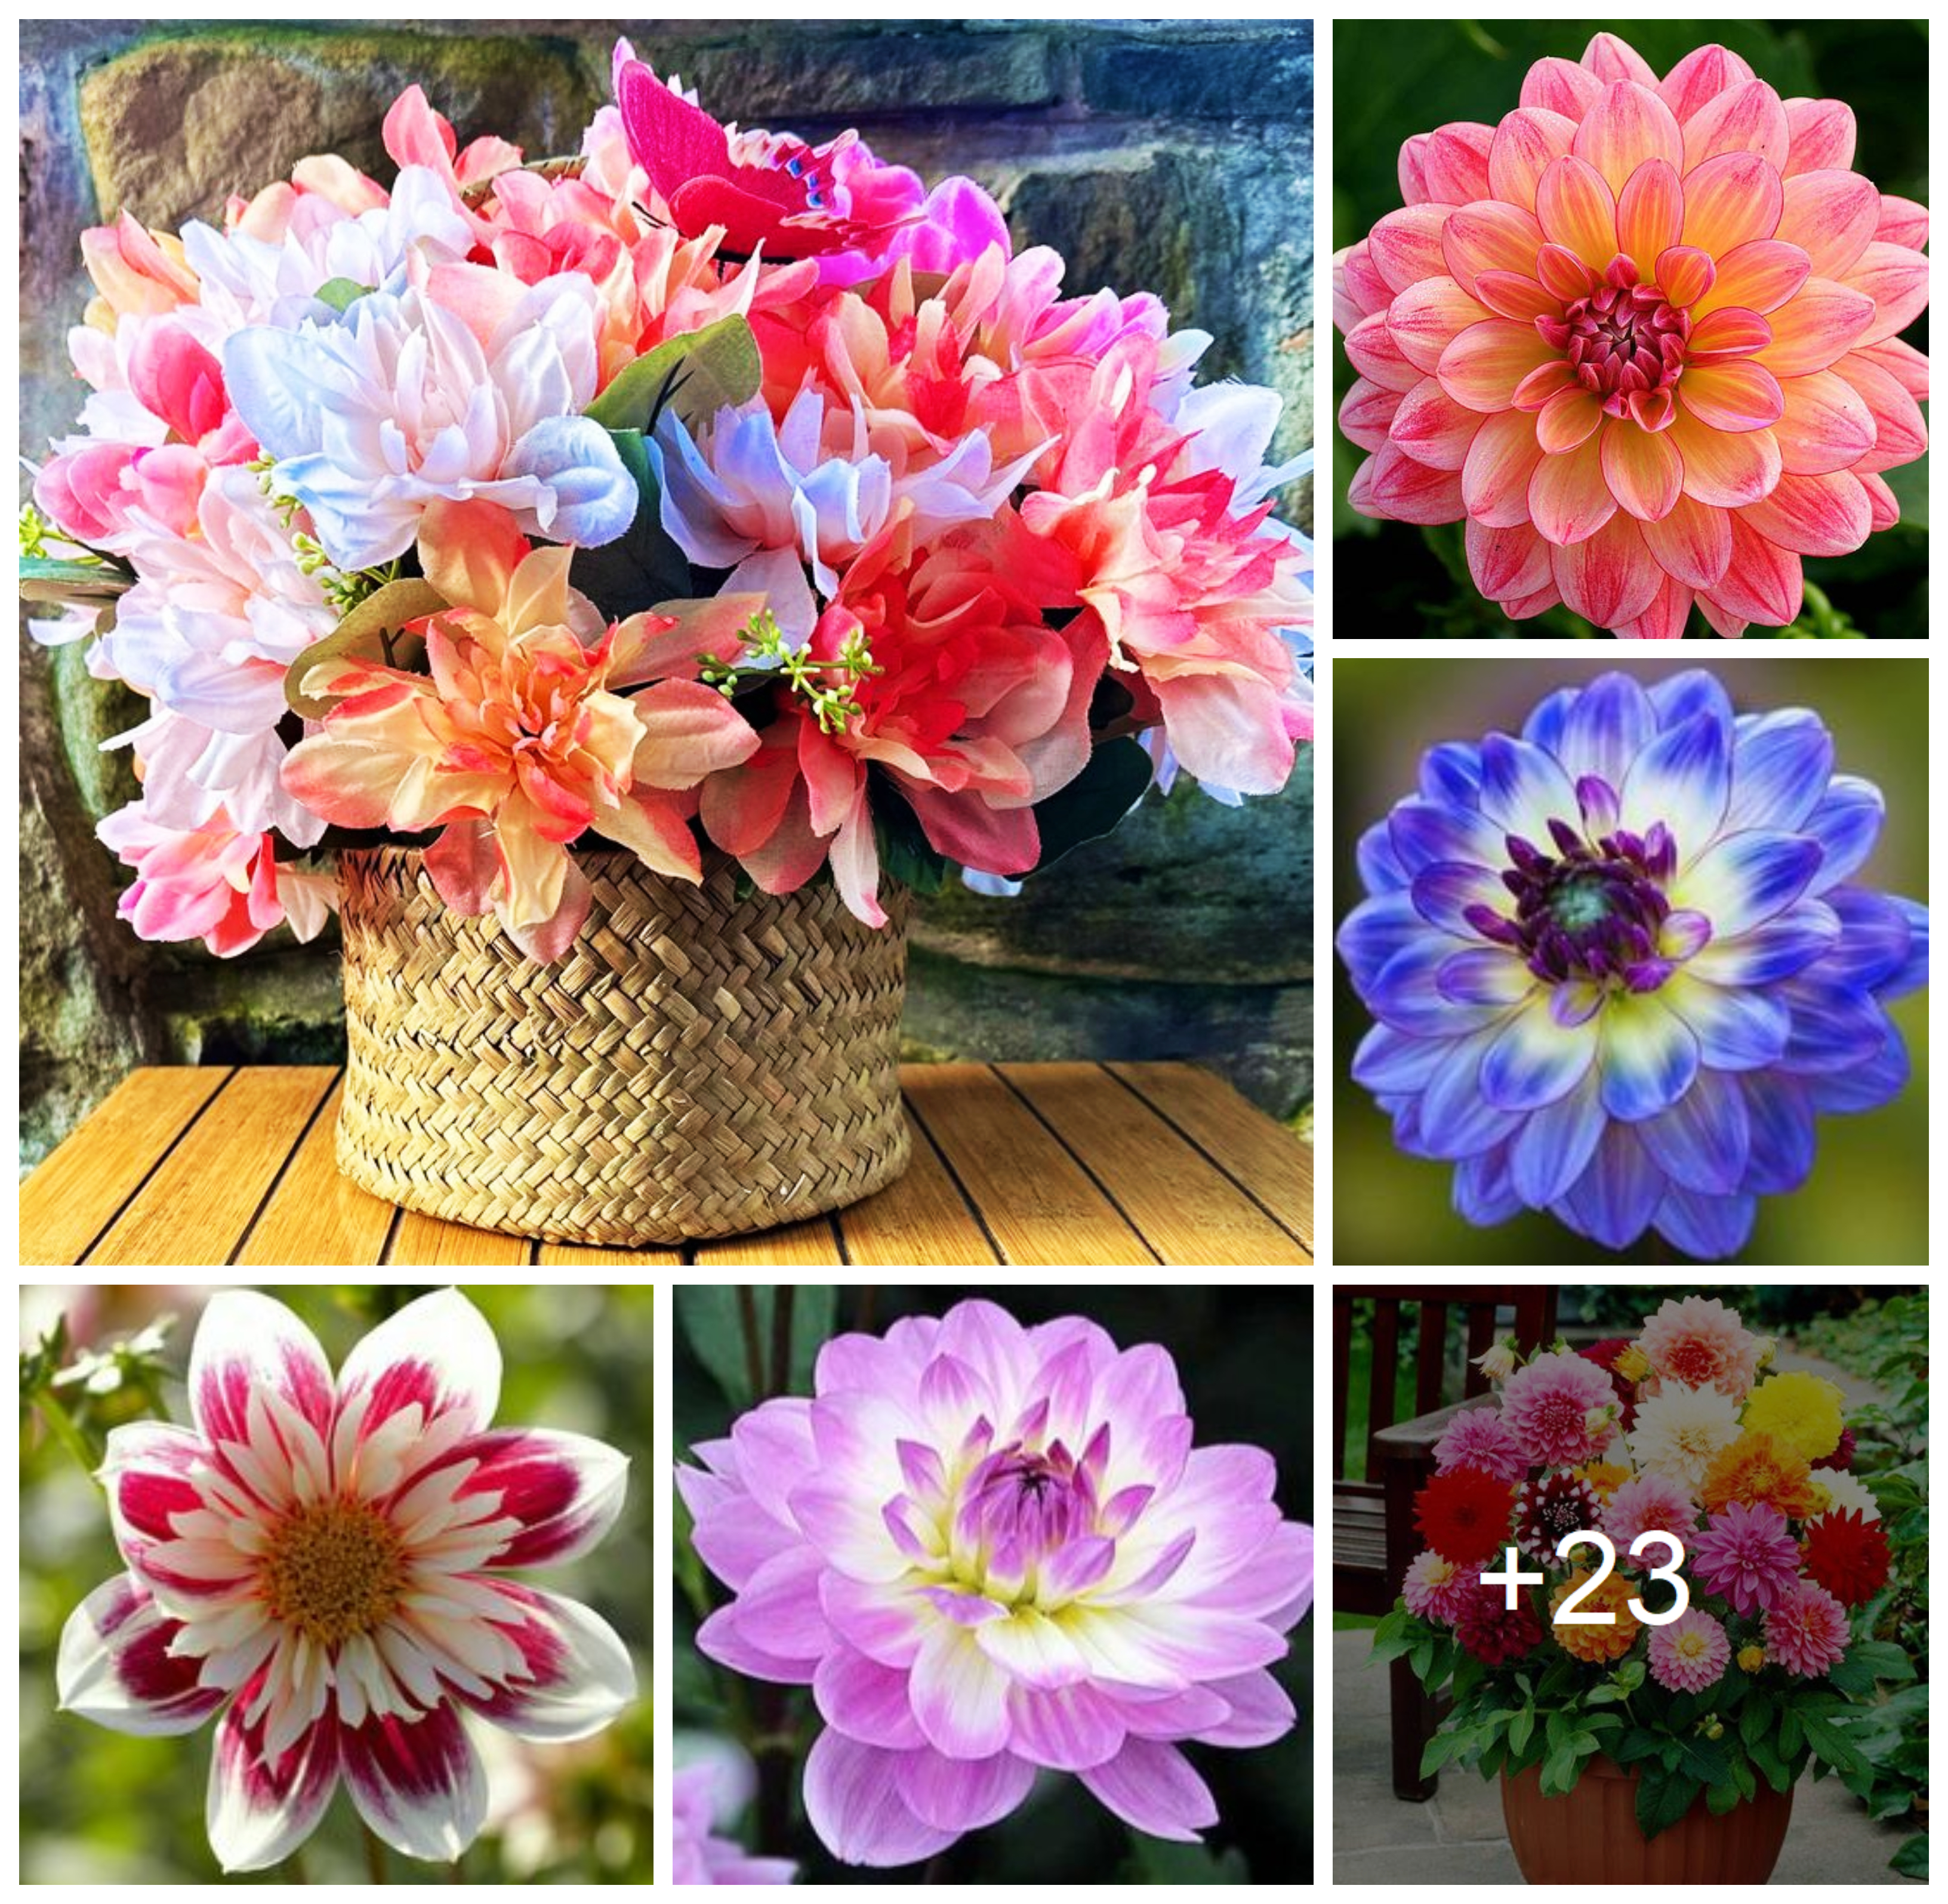 HOW TO GROW AND CARE FOR AMAZING COLORED DAHLIAS AT HOME